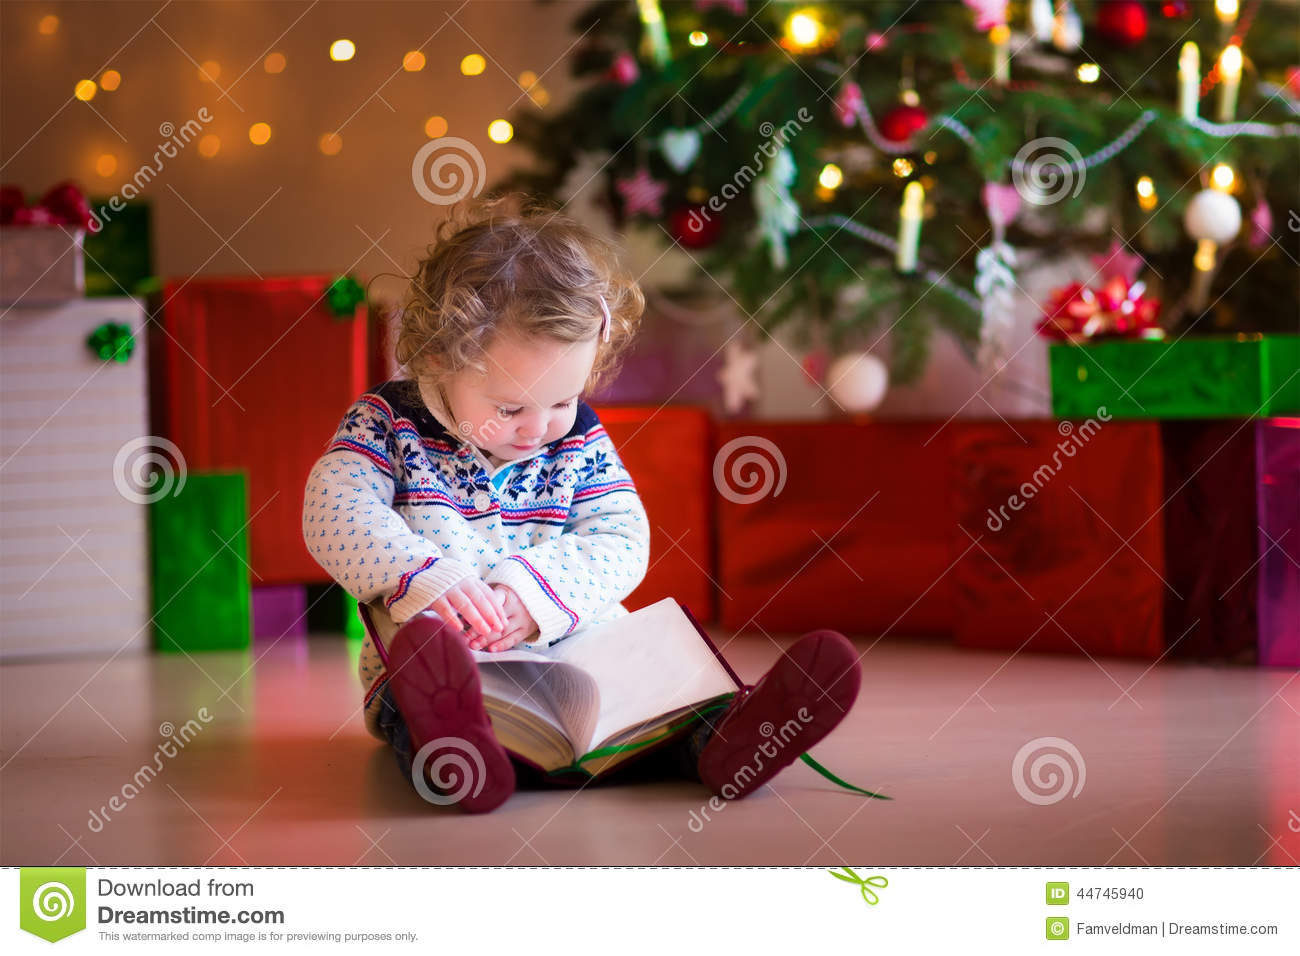 Sweater Sitting On A Floor Next To A Christmas Tree Reading A Book